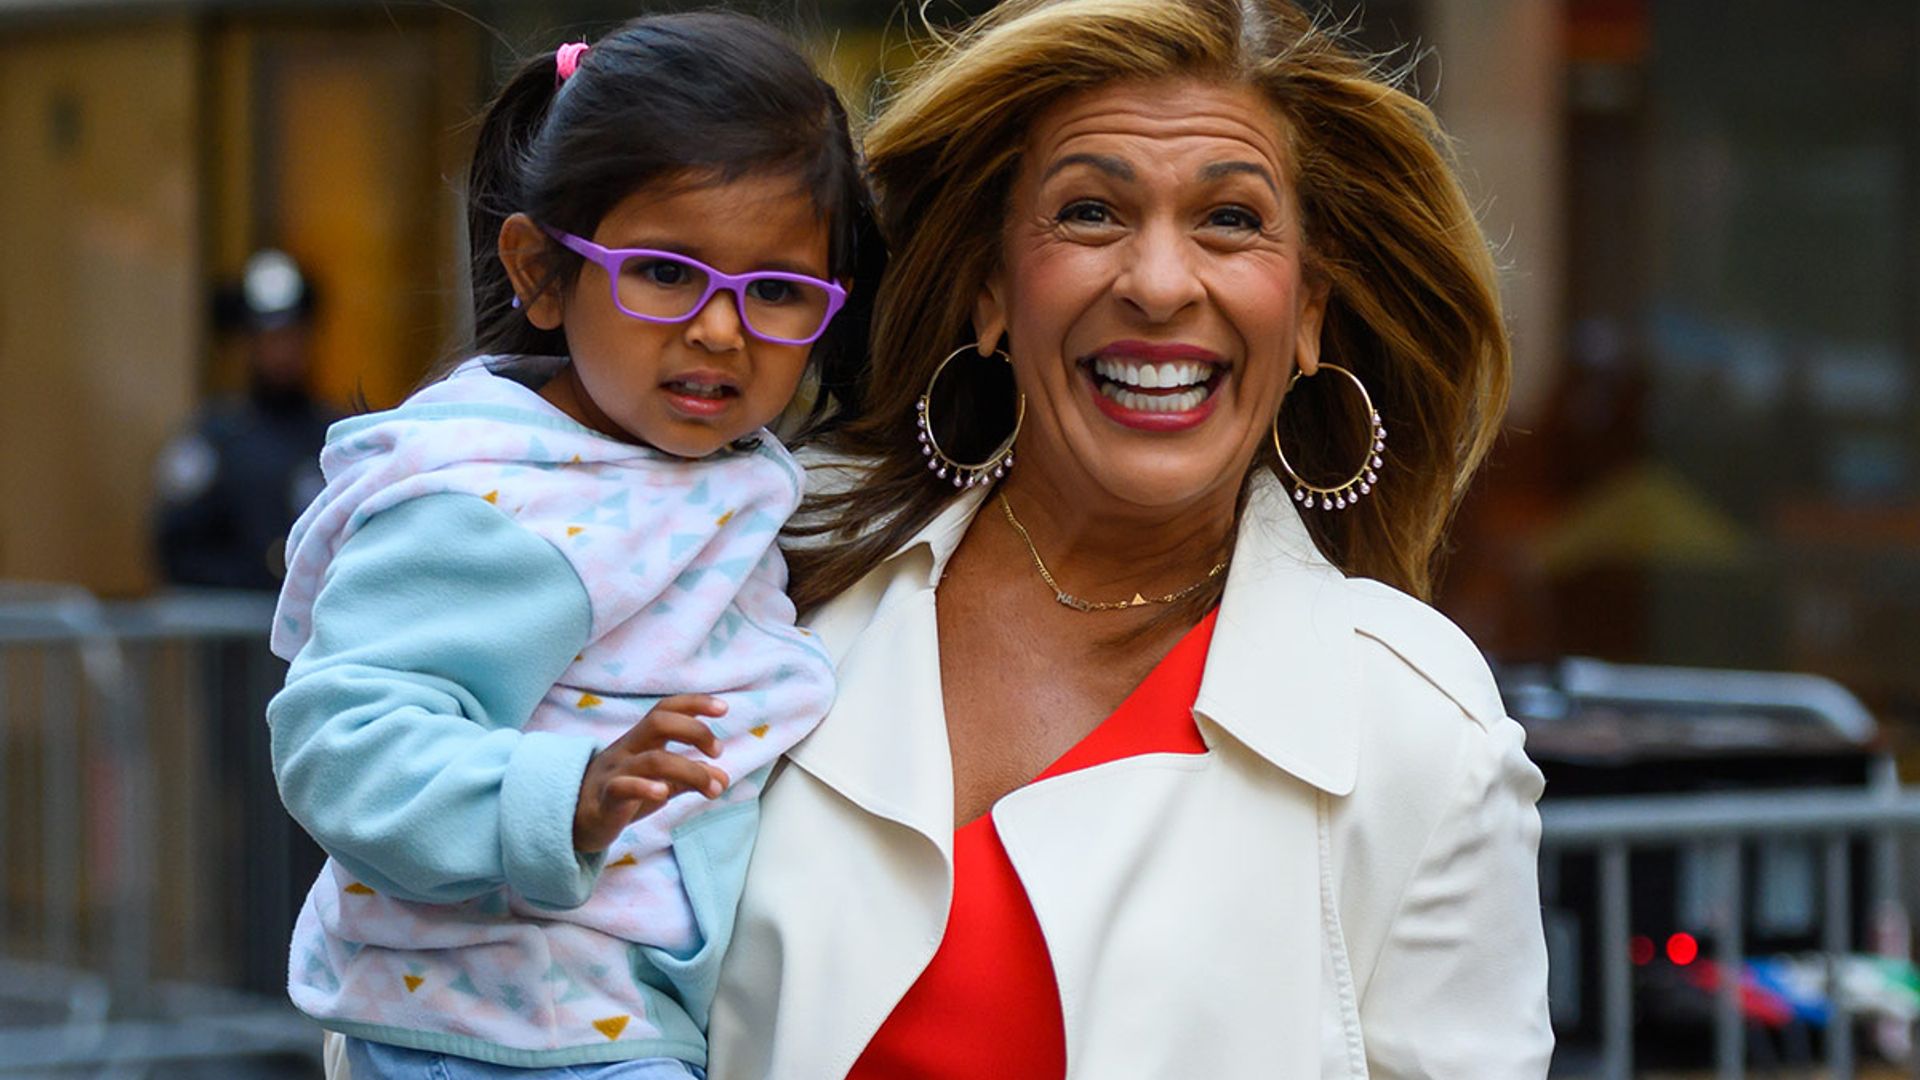 Hoda Kotb's daughter's reaction to becoming a big sister is priceless in unearthed video